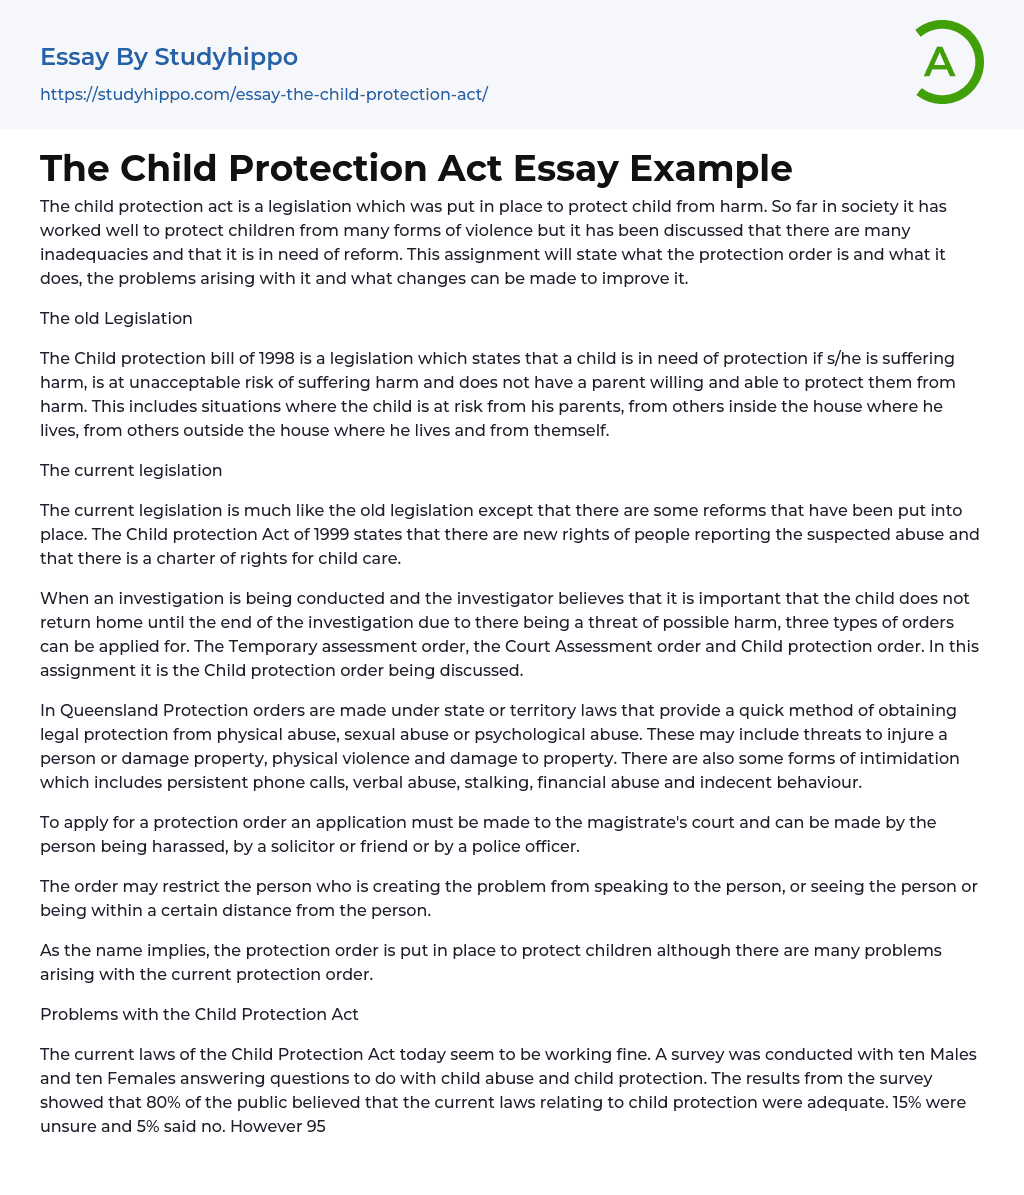 The Child Protection Act Essay Example